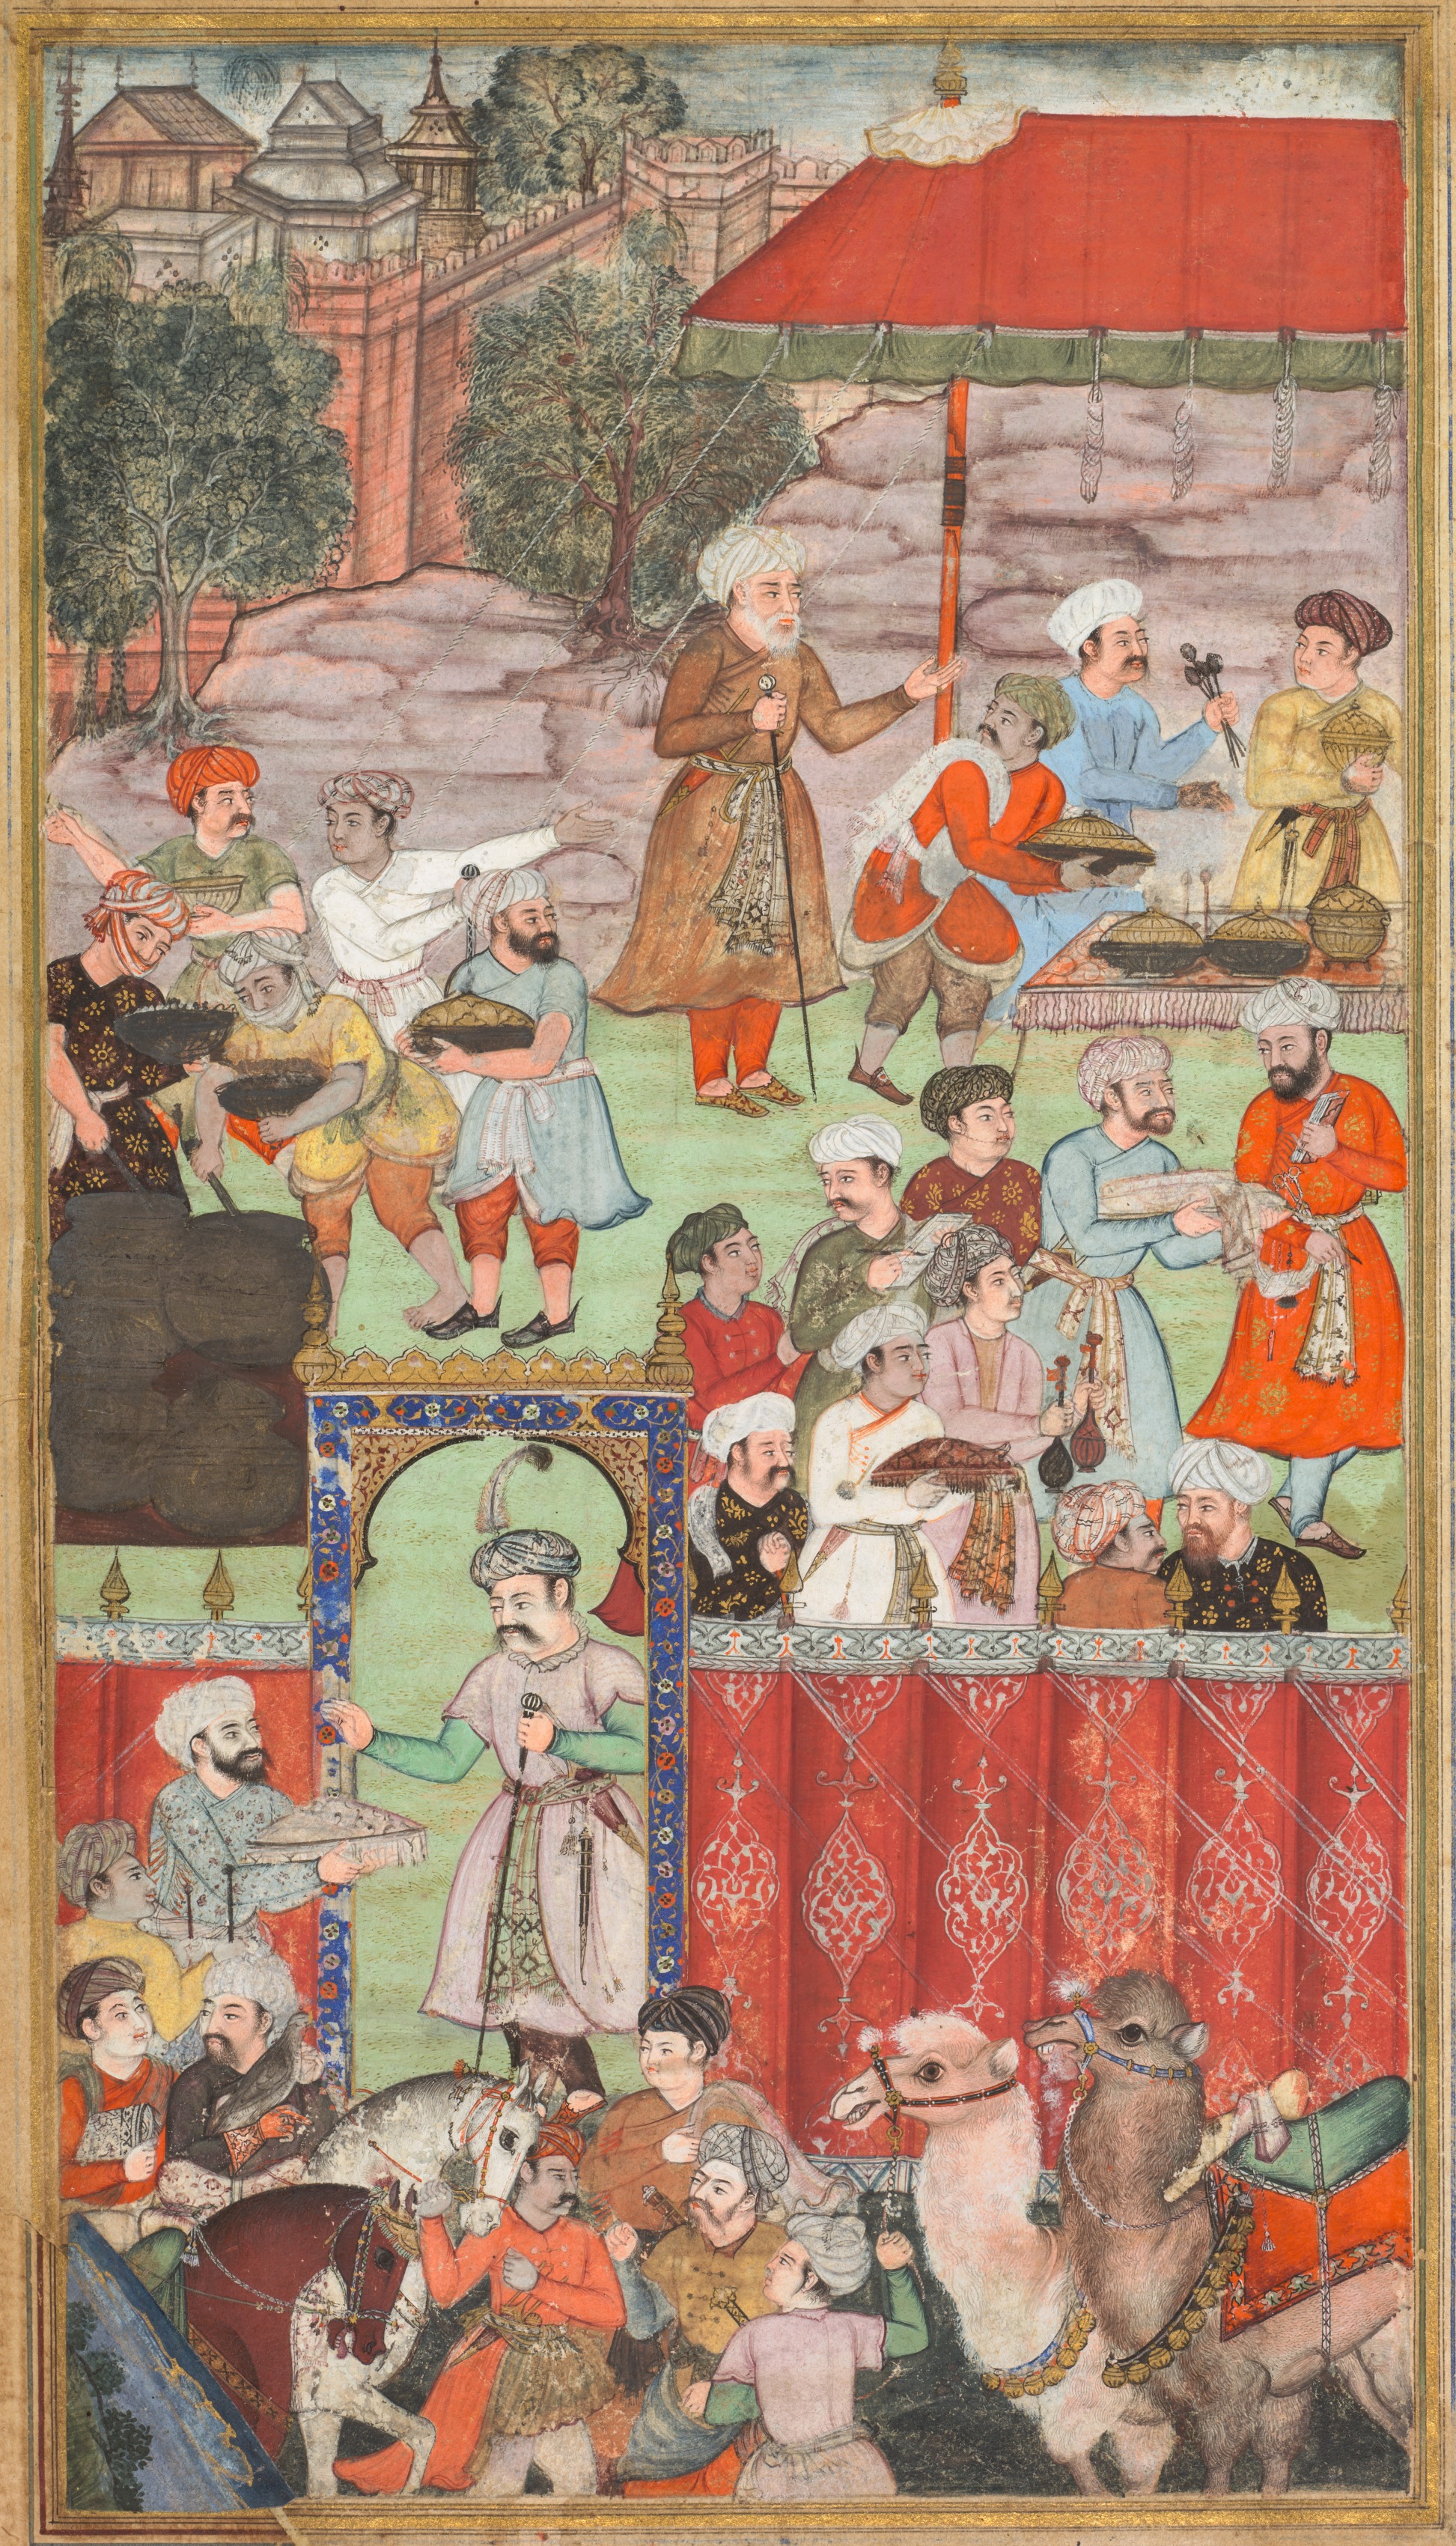 A feast for Babur hosted by his half-brother Jahangir Mirza in Ghazni in May 1505, from a Babur-nama (Memoirs of Babur)